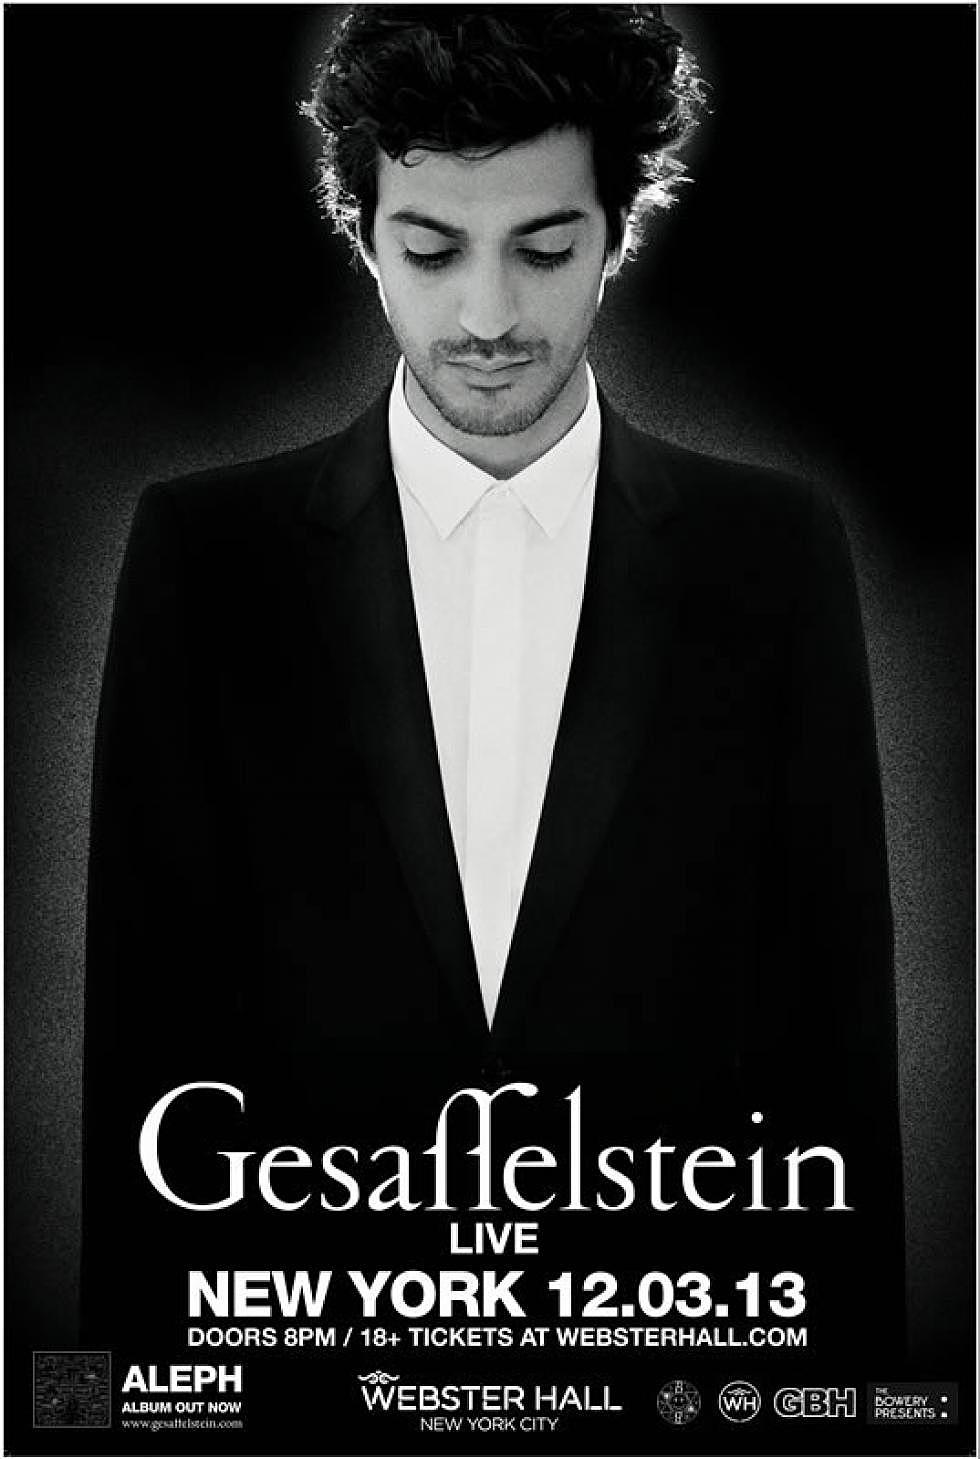 Contest: Win a pair of tickets to Gesaffelstein @ Webster Hall, 12/3 &#038; a pair of Urbanears Headphones!